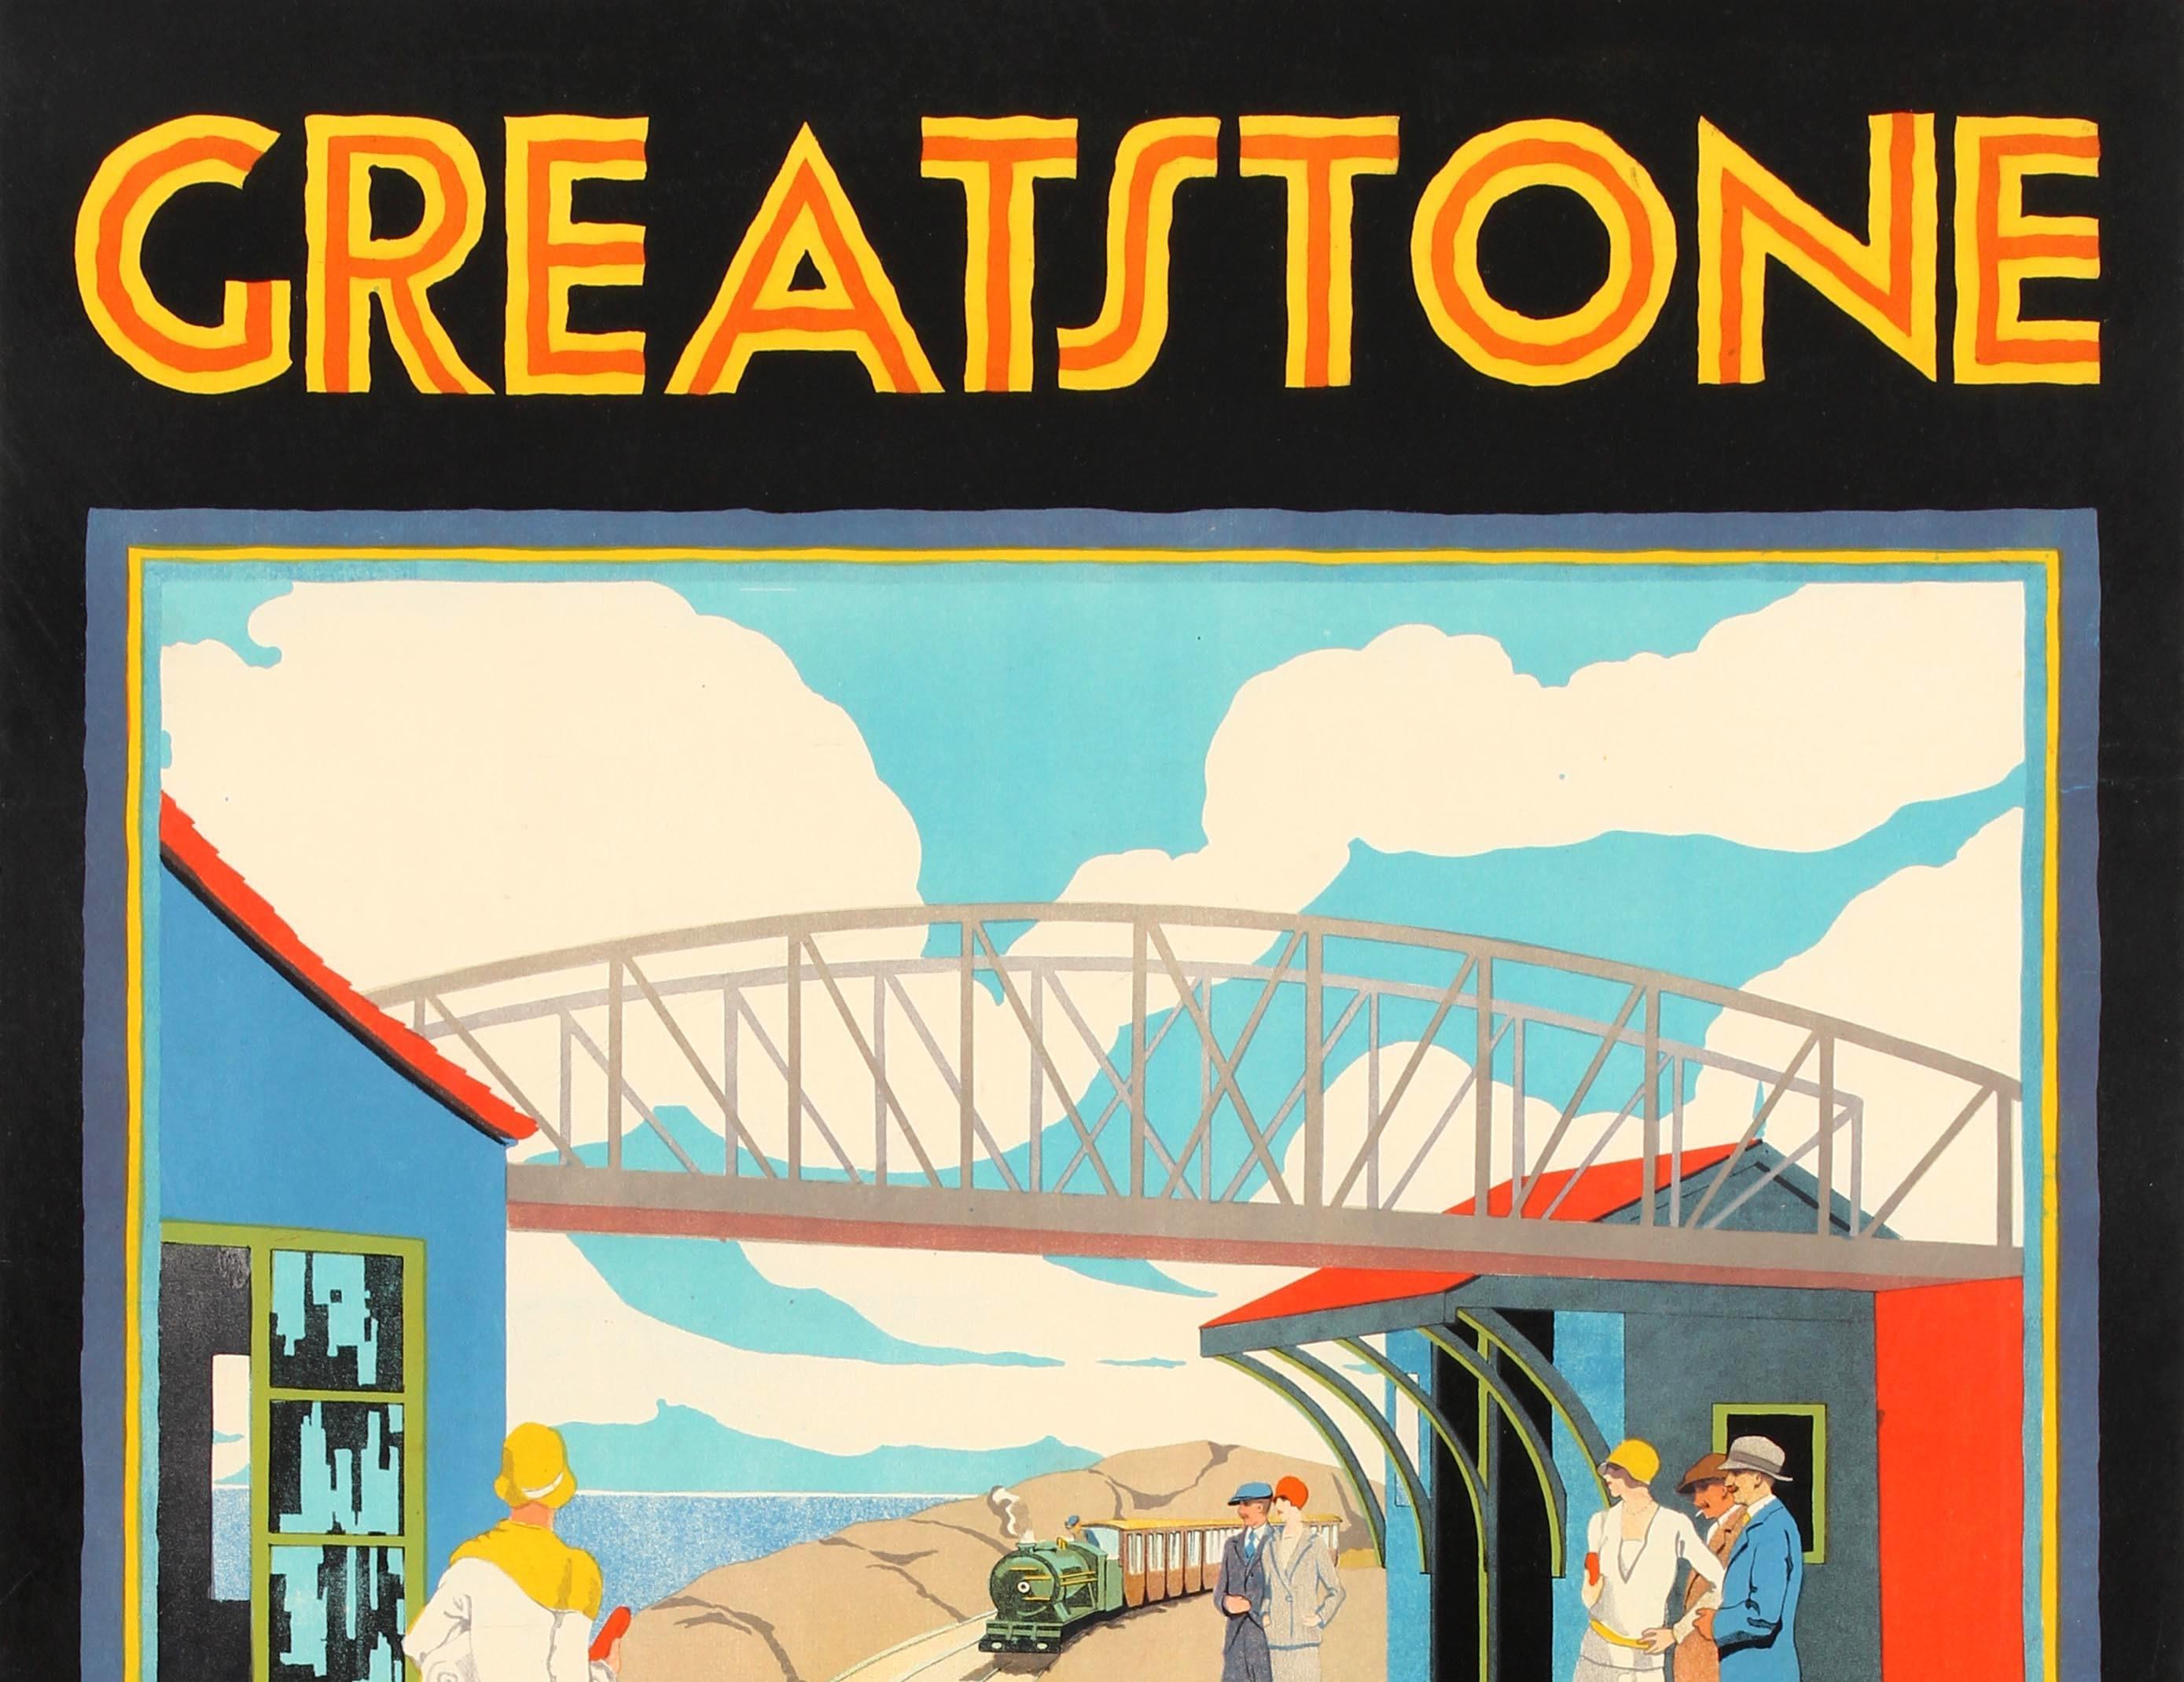 Original vintage poster for Greatstone by the Romney, Hythe and Dymchurch Railway - the world's smallest public railway. Stunning Art Deco image of the train pulling into the Greatstone Dunes station where smartly dressed men in suits and ladies in